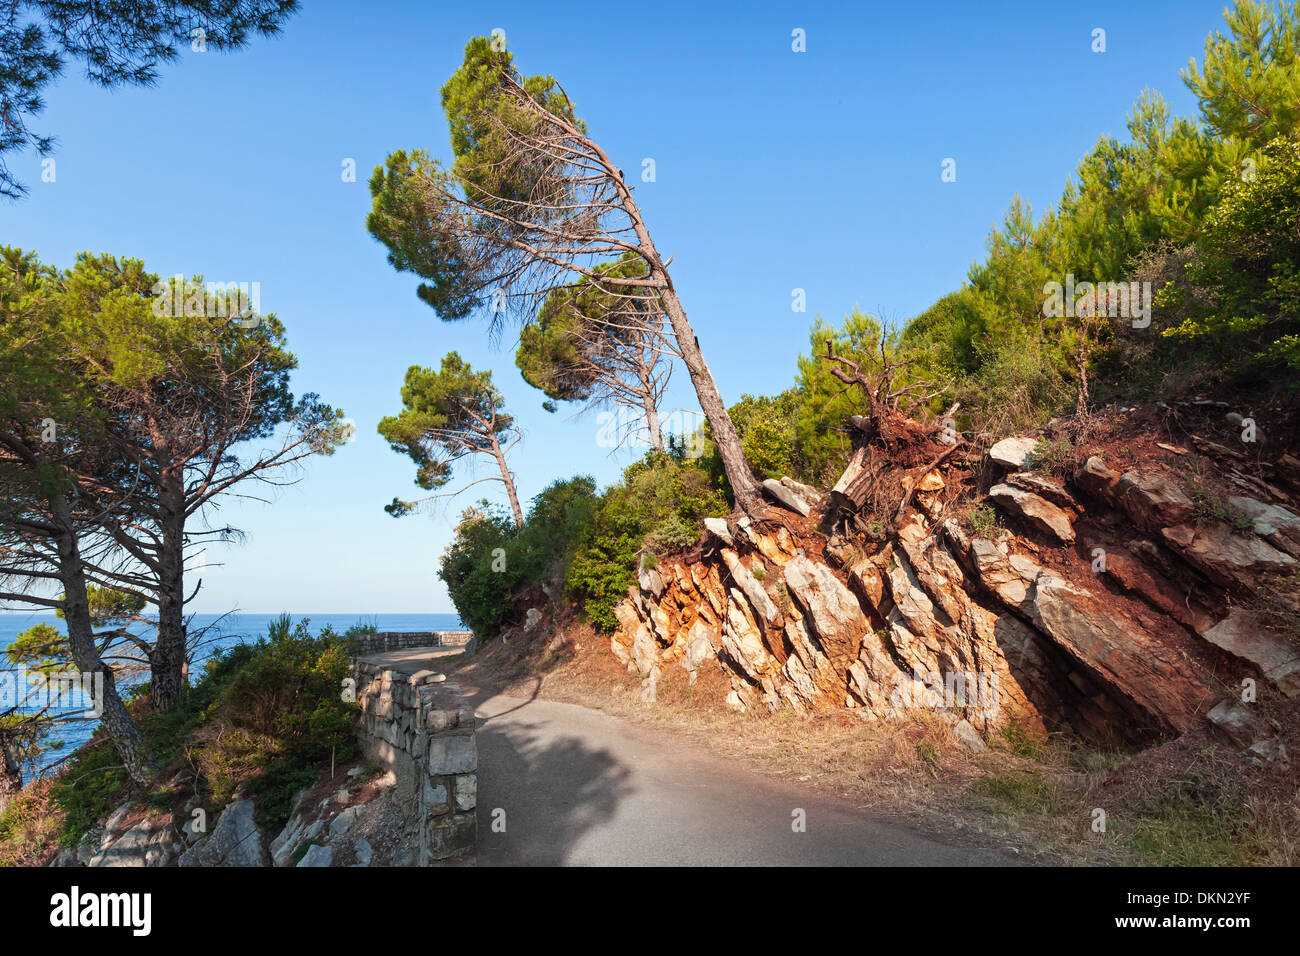 Coastal road with pine trees growing on mountains Stock Photo